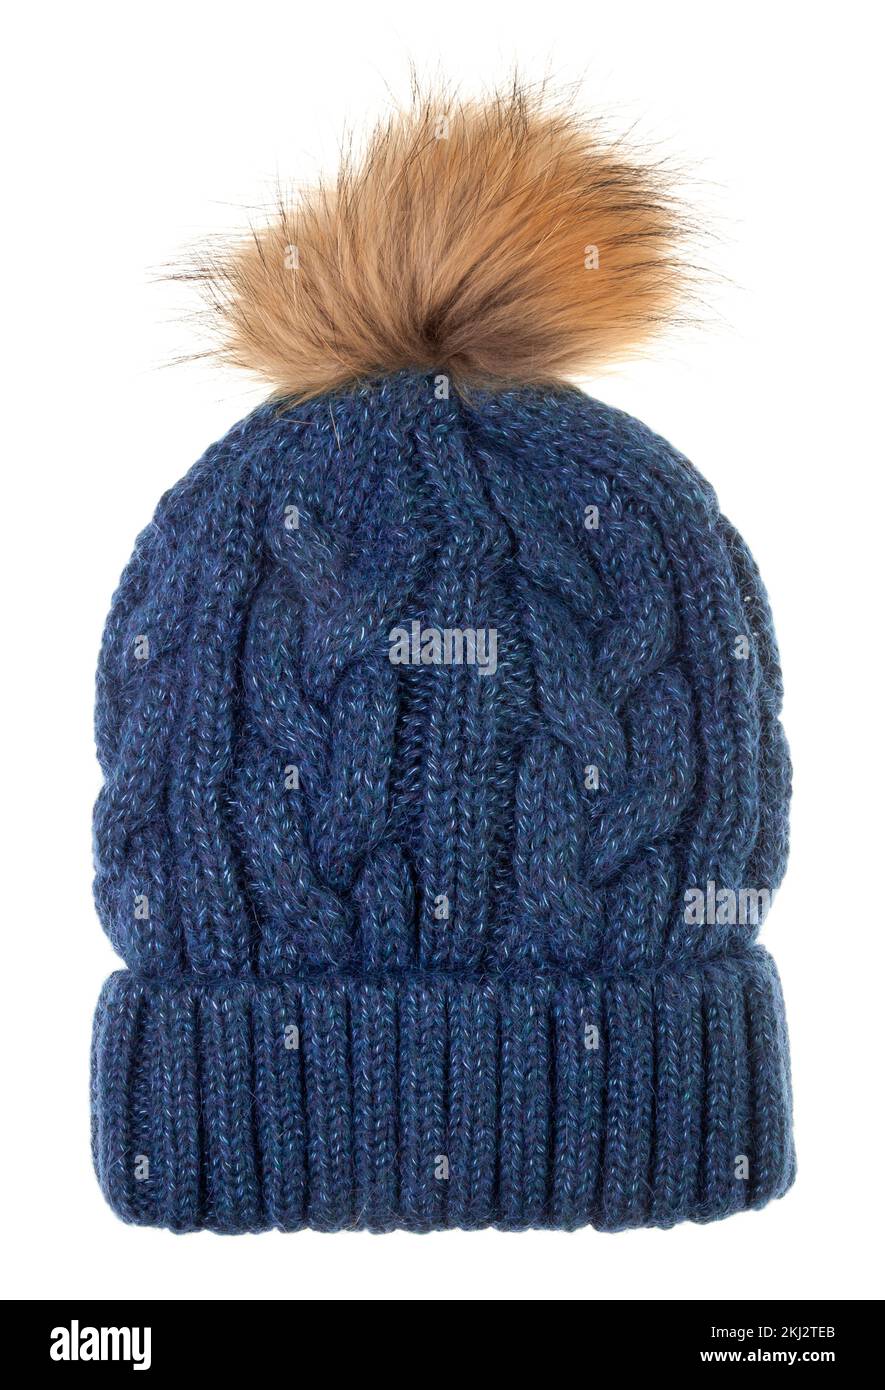 Blue woolly winter bobble hat decorated with cable knitting ornament isolated on white background. Handmade woolly cap with fake fur pompom on top Stock Photo